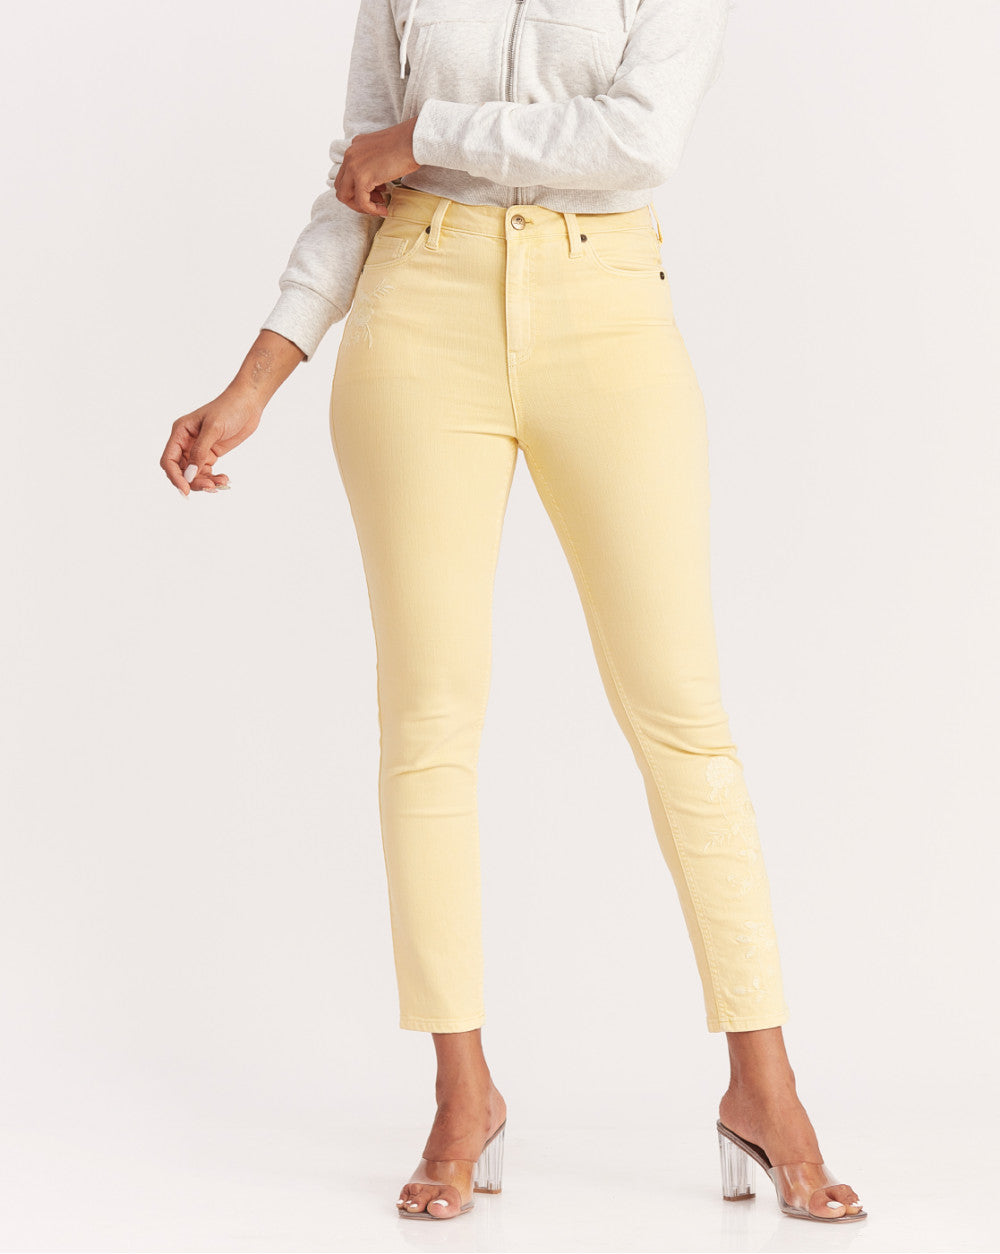 Skinny Fit High Waist Floral Embroidered Colored Jeans - Daffodil Yellow